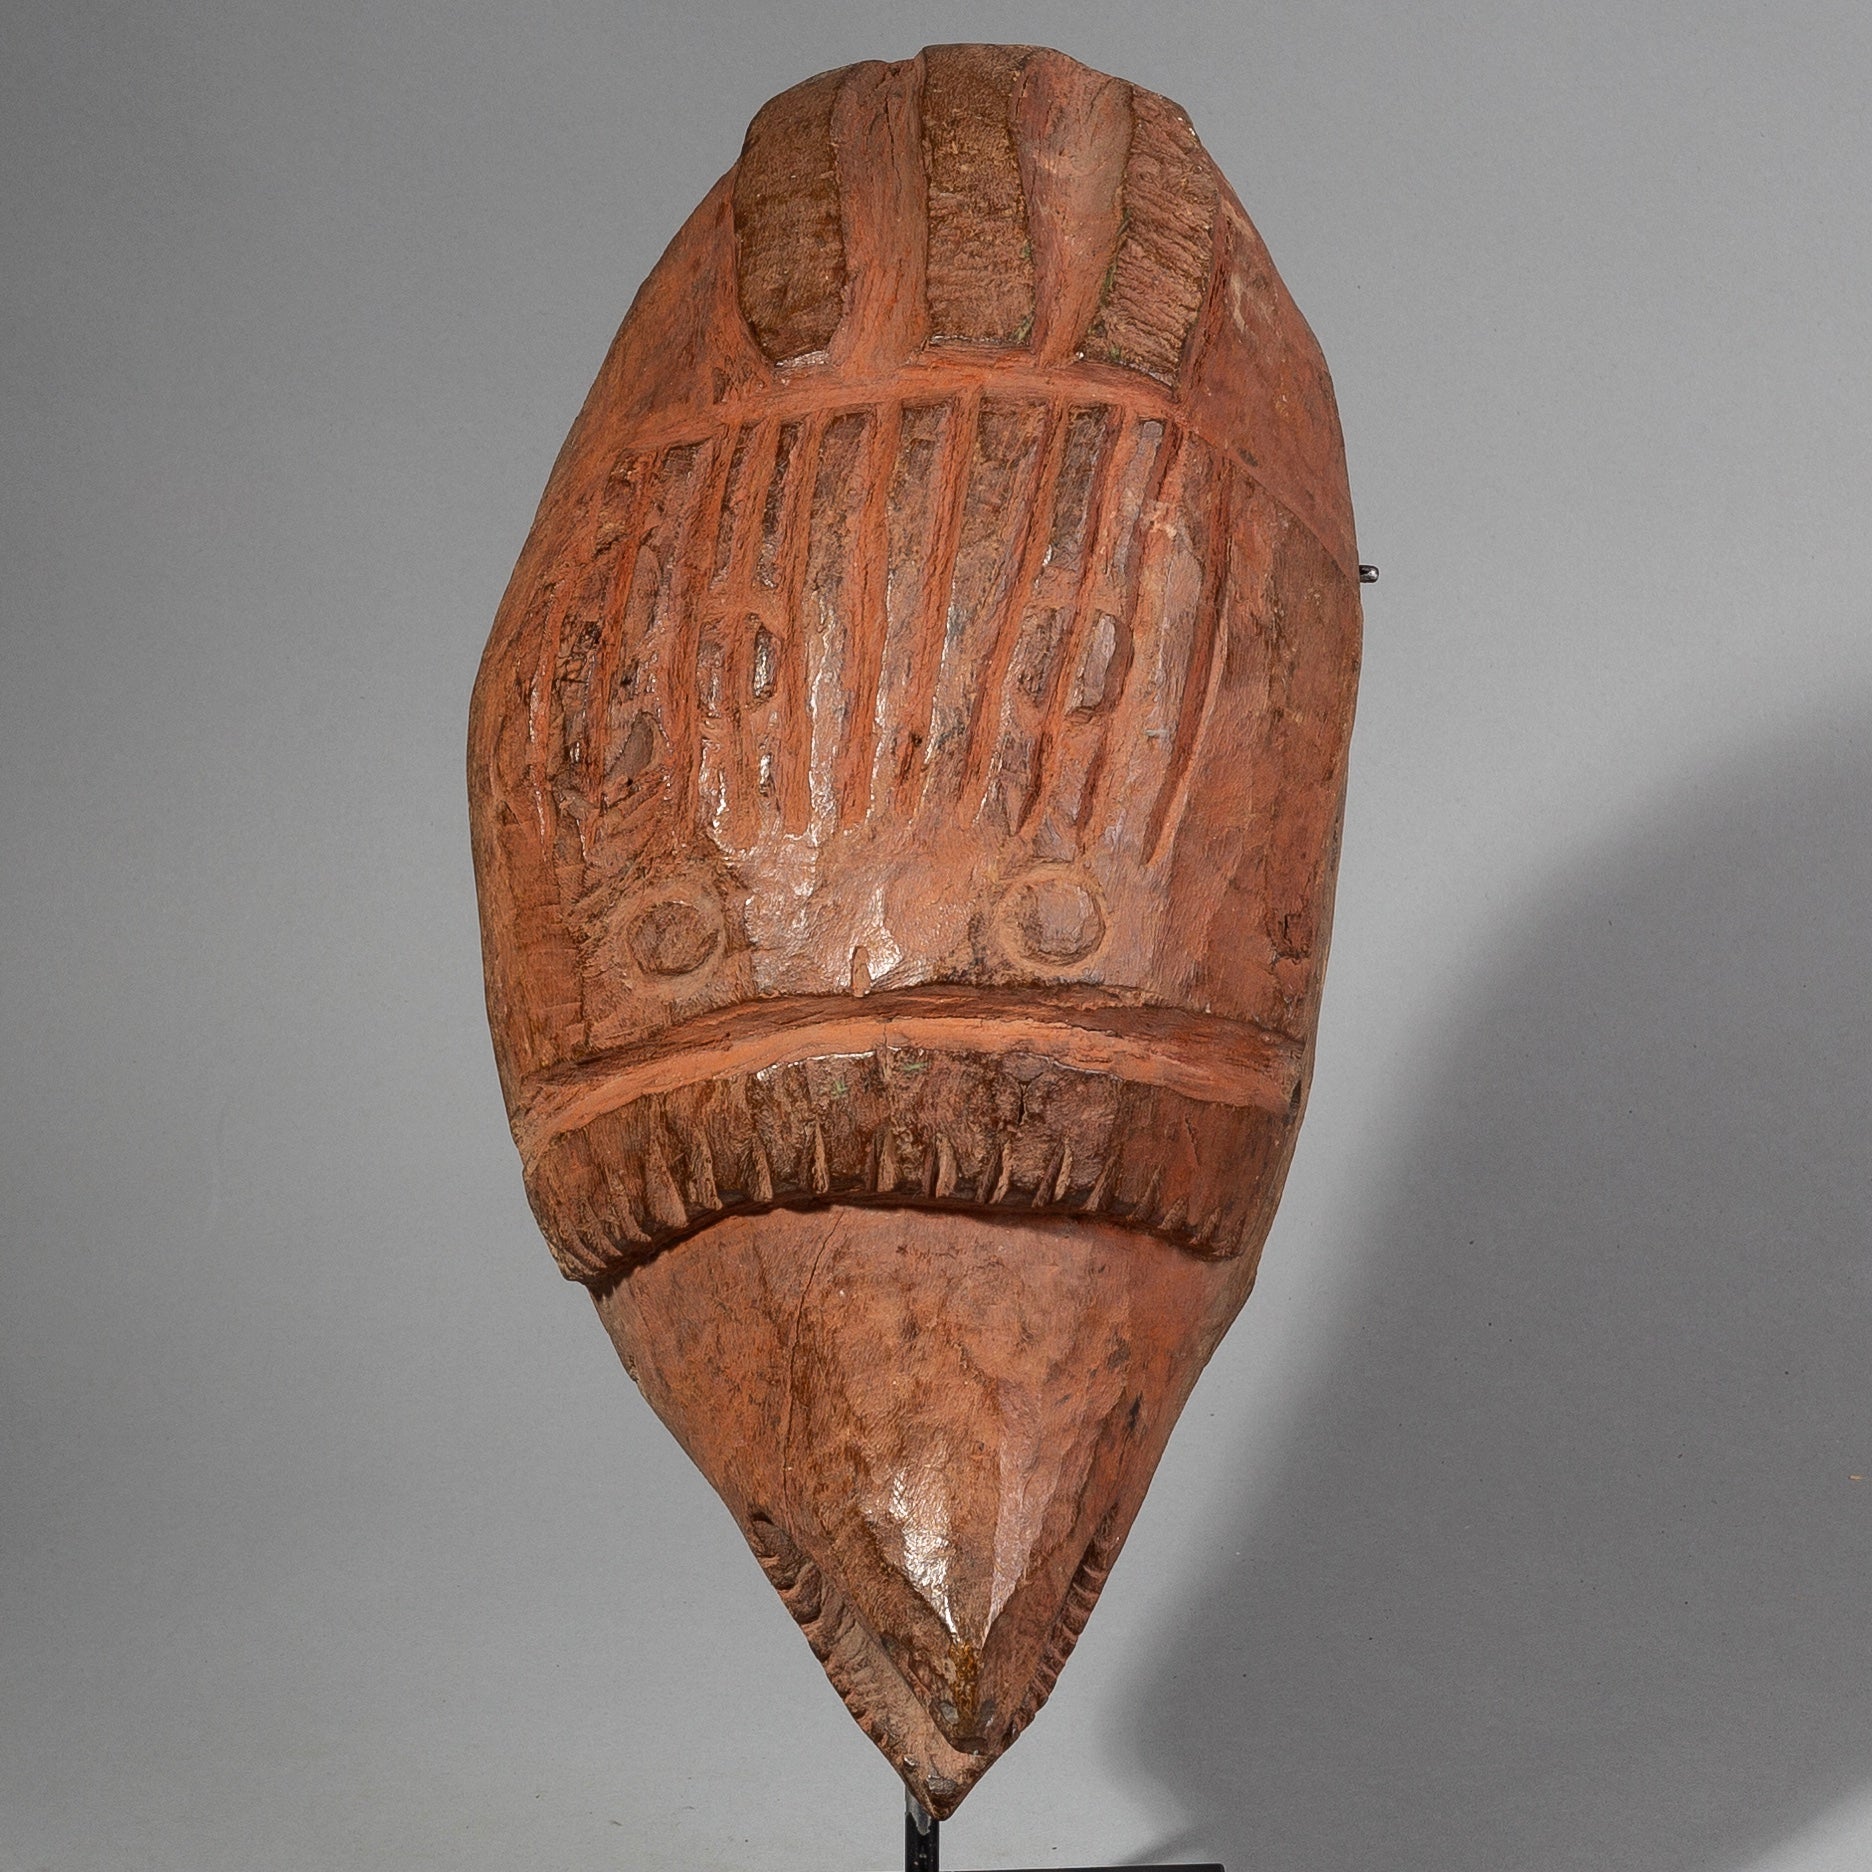 SD AN ARTISTIC MAMBILA MASK FROM CAMEROON, W. AFRICA (No 1459 )